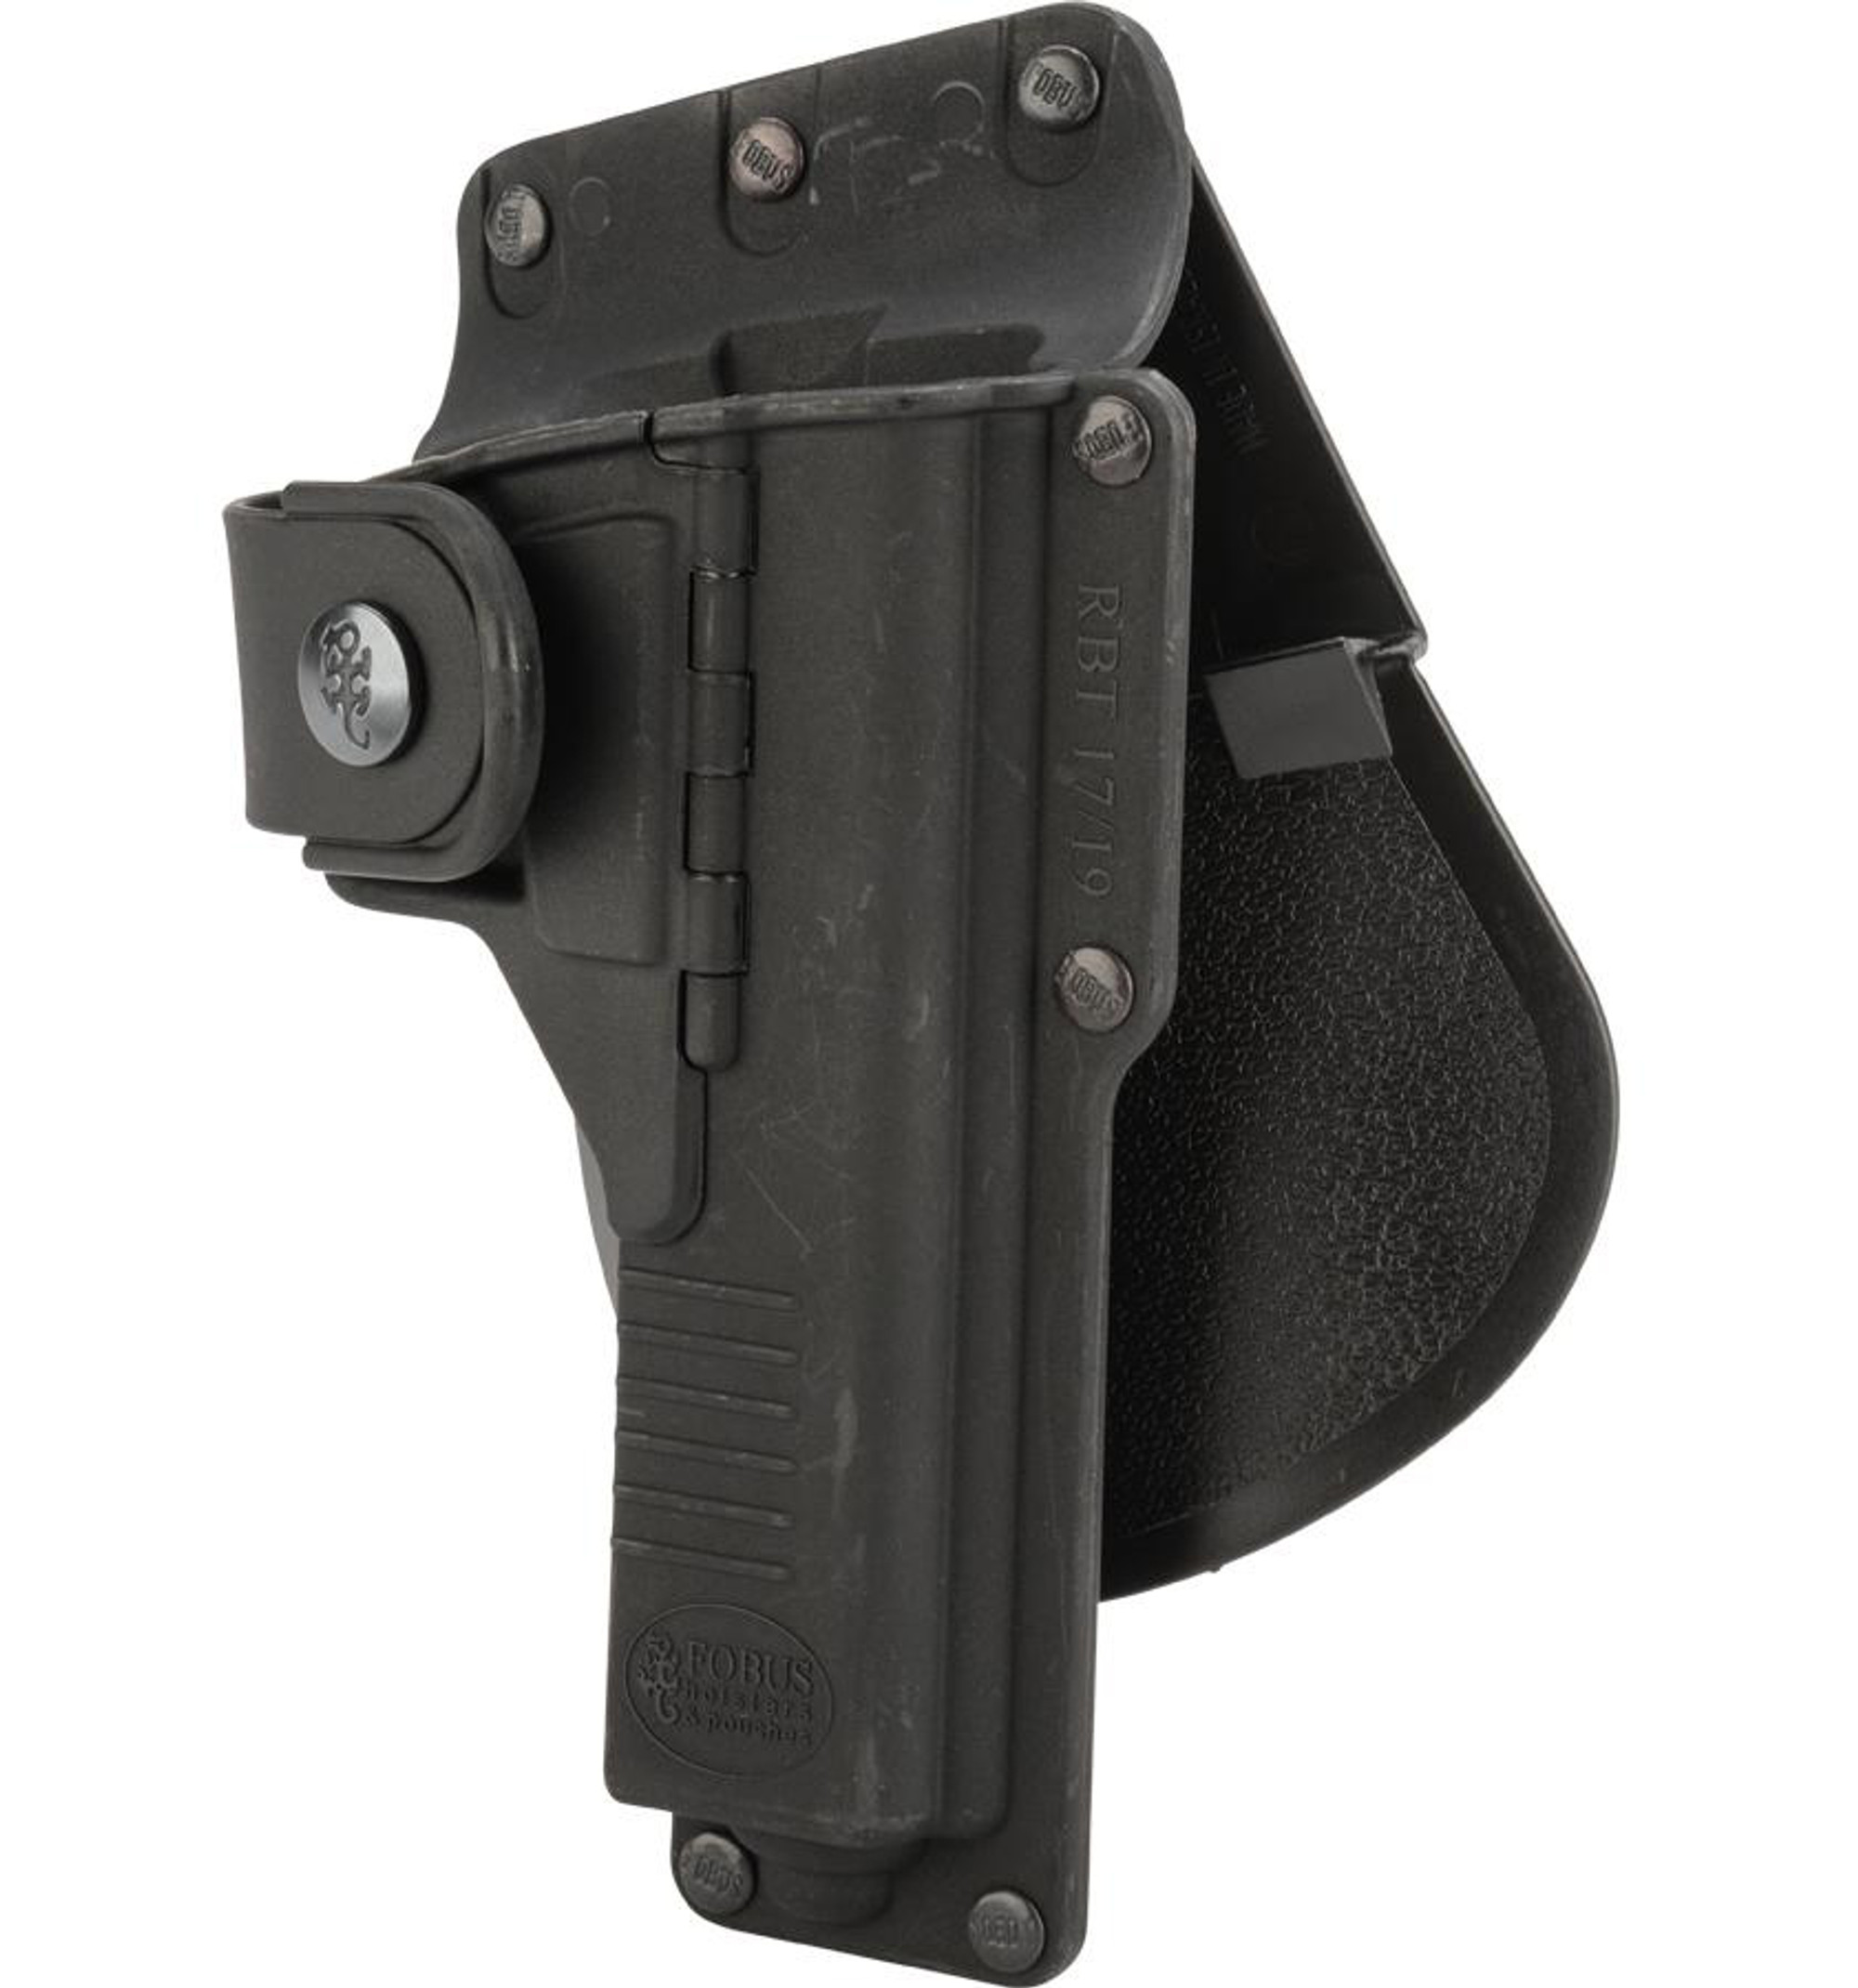 Fobus Tactical Duty Holster w/ Active Retention (Model: GLOCK 19 , 23, 32 w/ Light or Laser / Paddle)